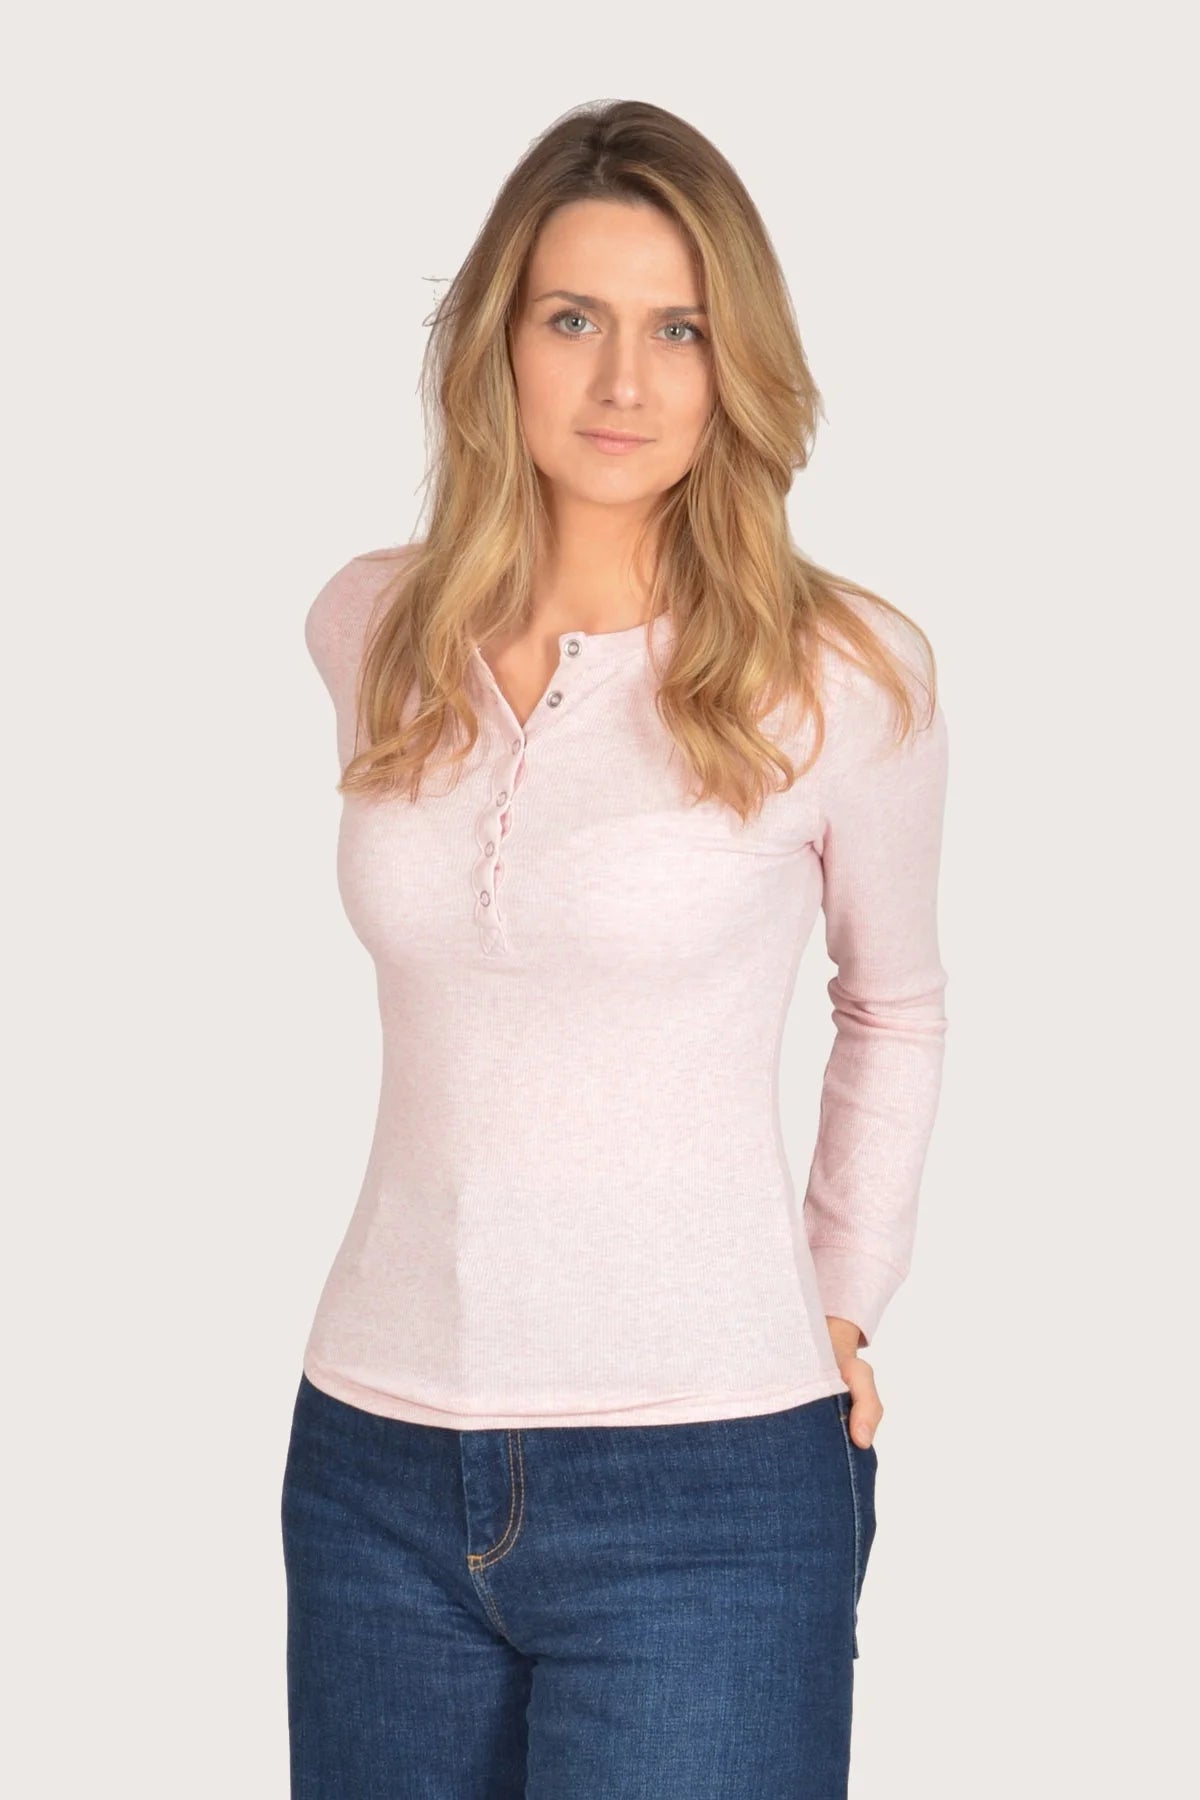 M&S Cotton Ribbed Henley Top Pale Pink / 12